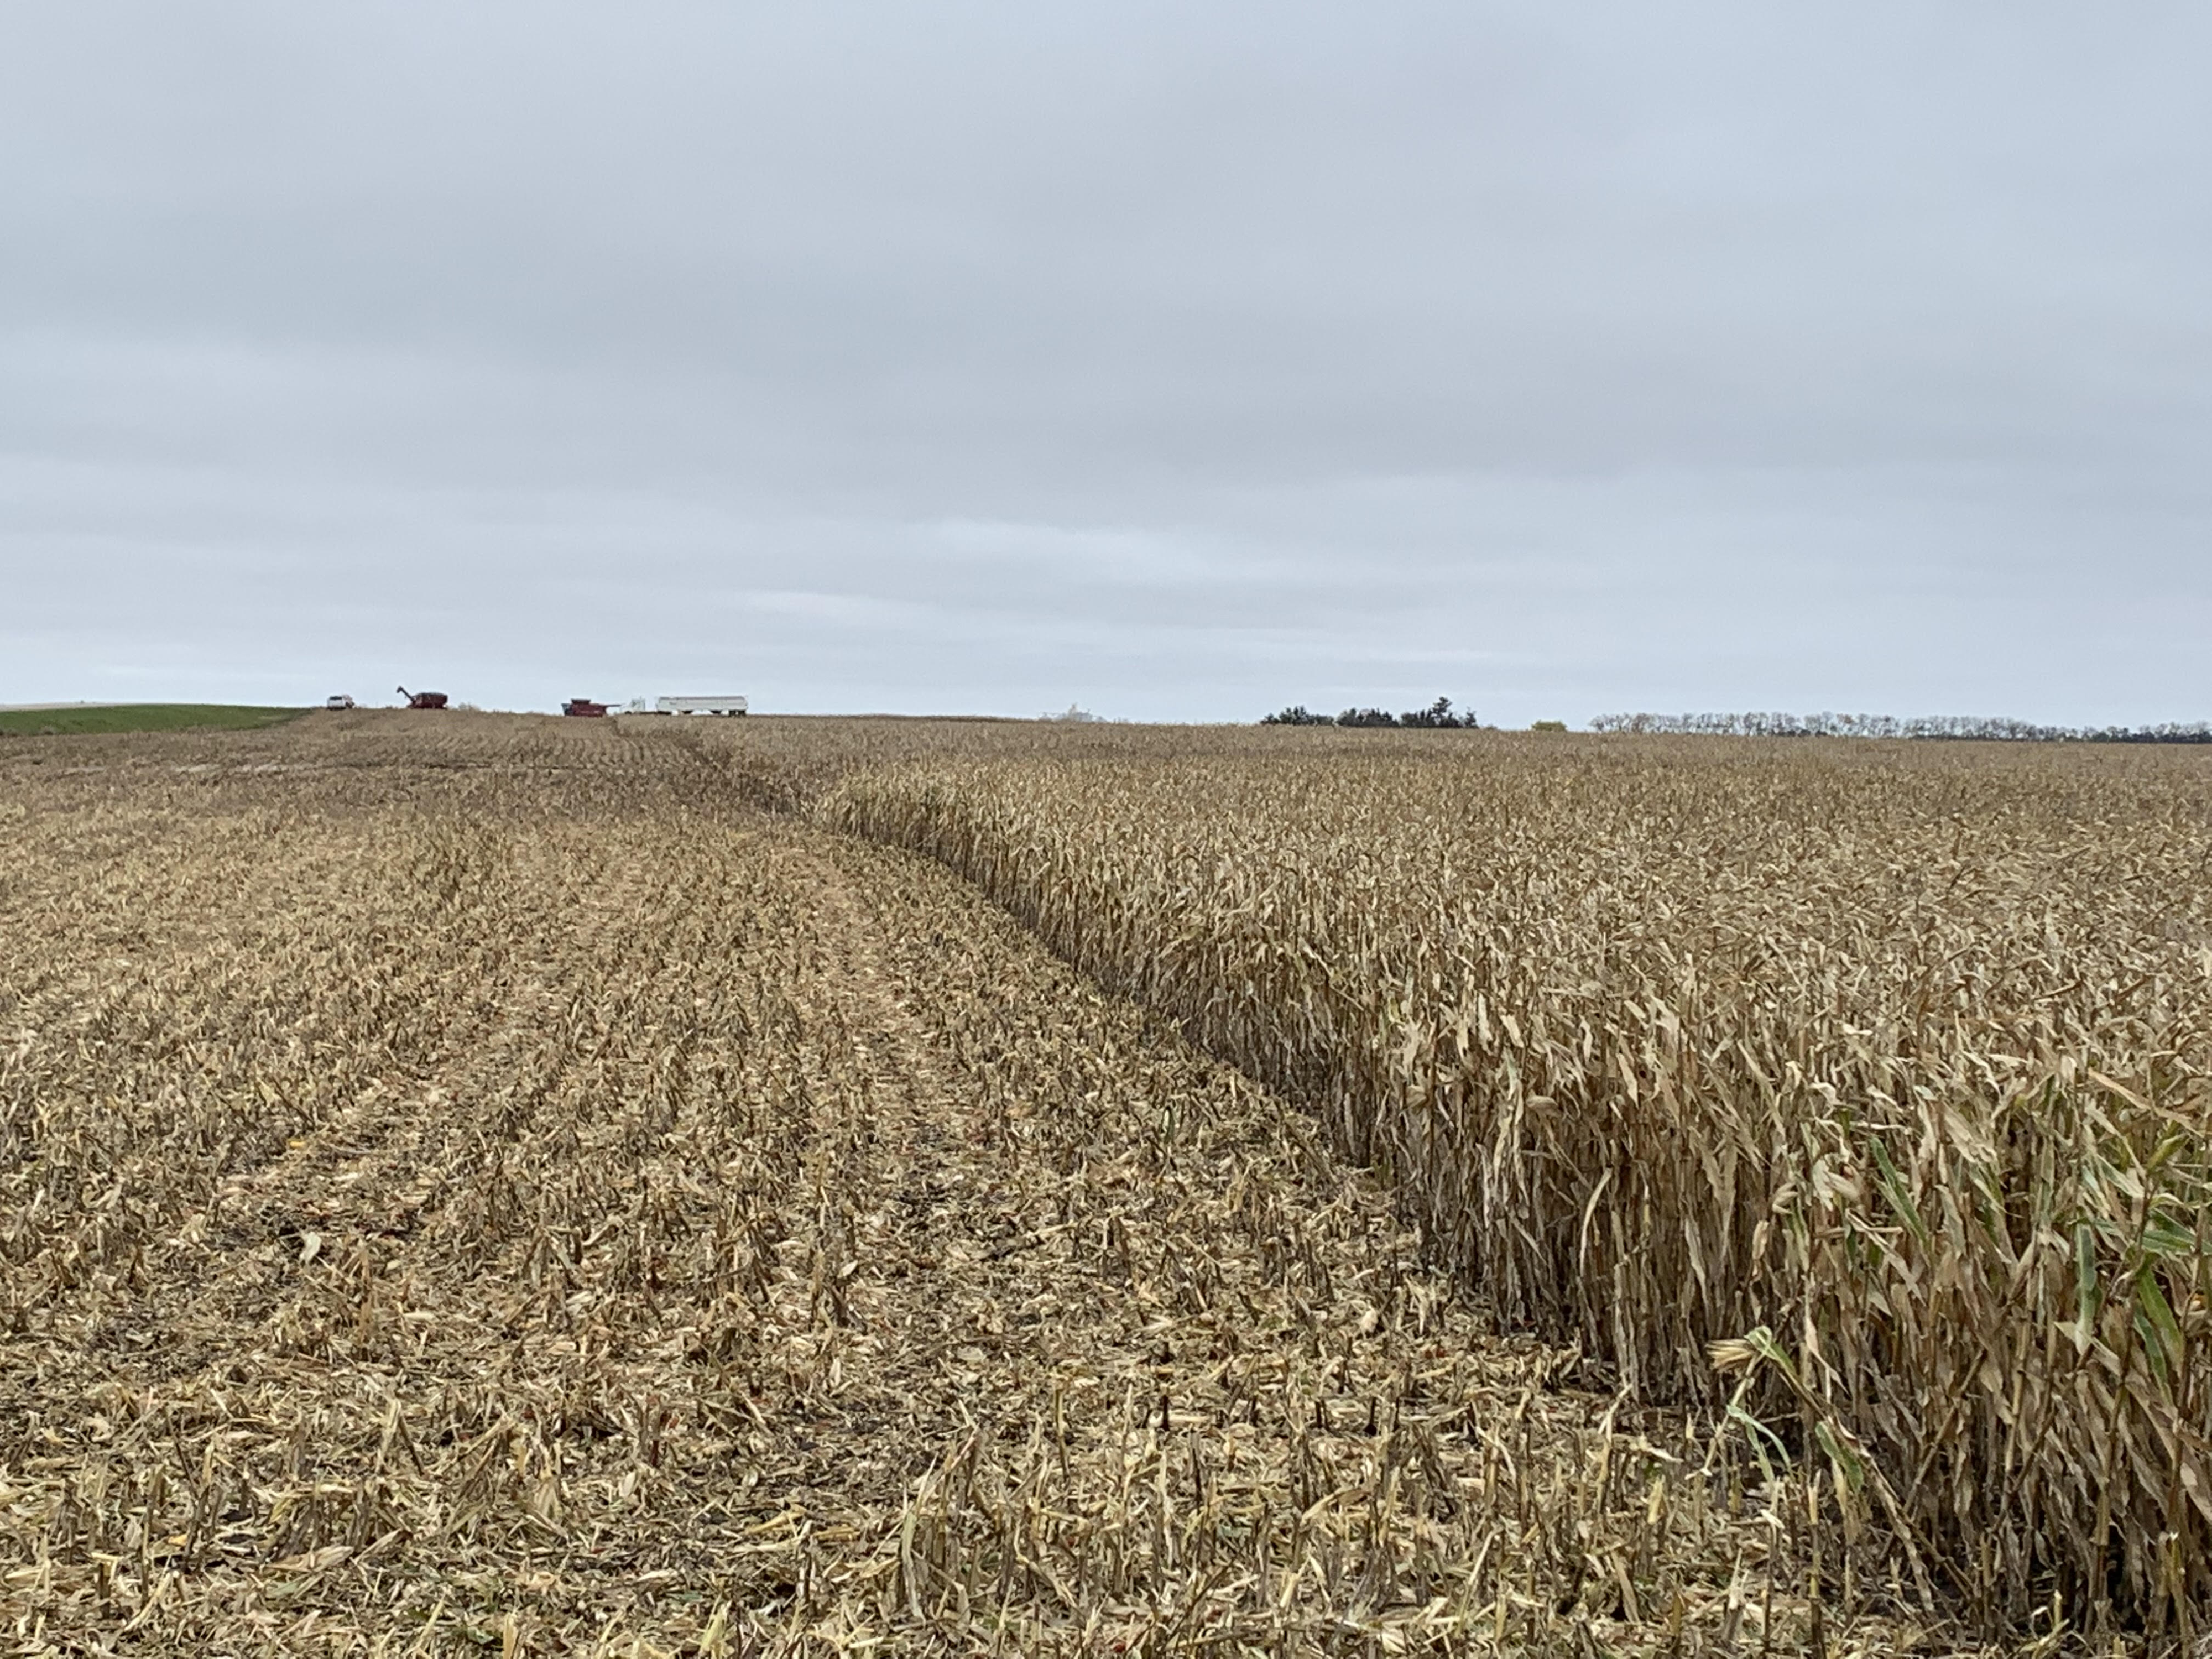 Morning Ag News, February 17, 2022: Producers work to finalize crop insurance decisions